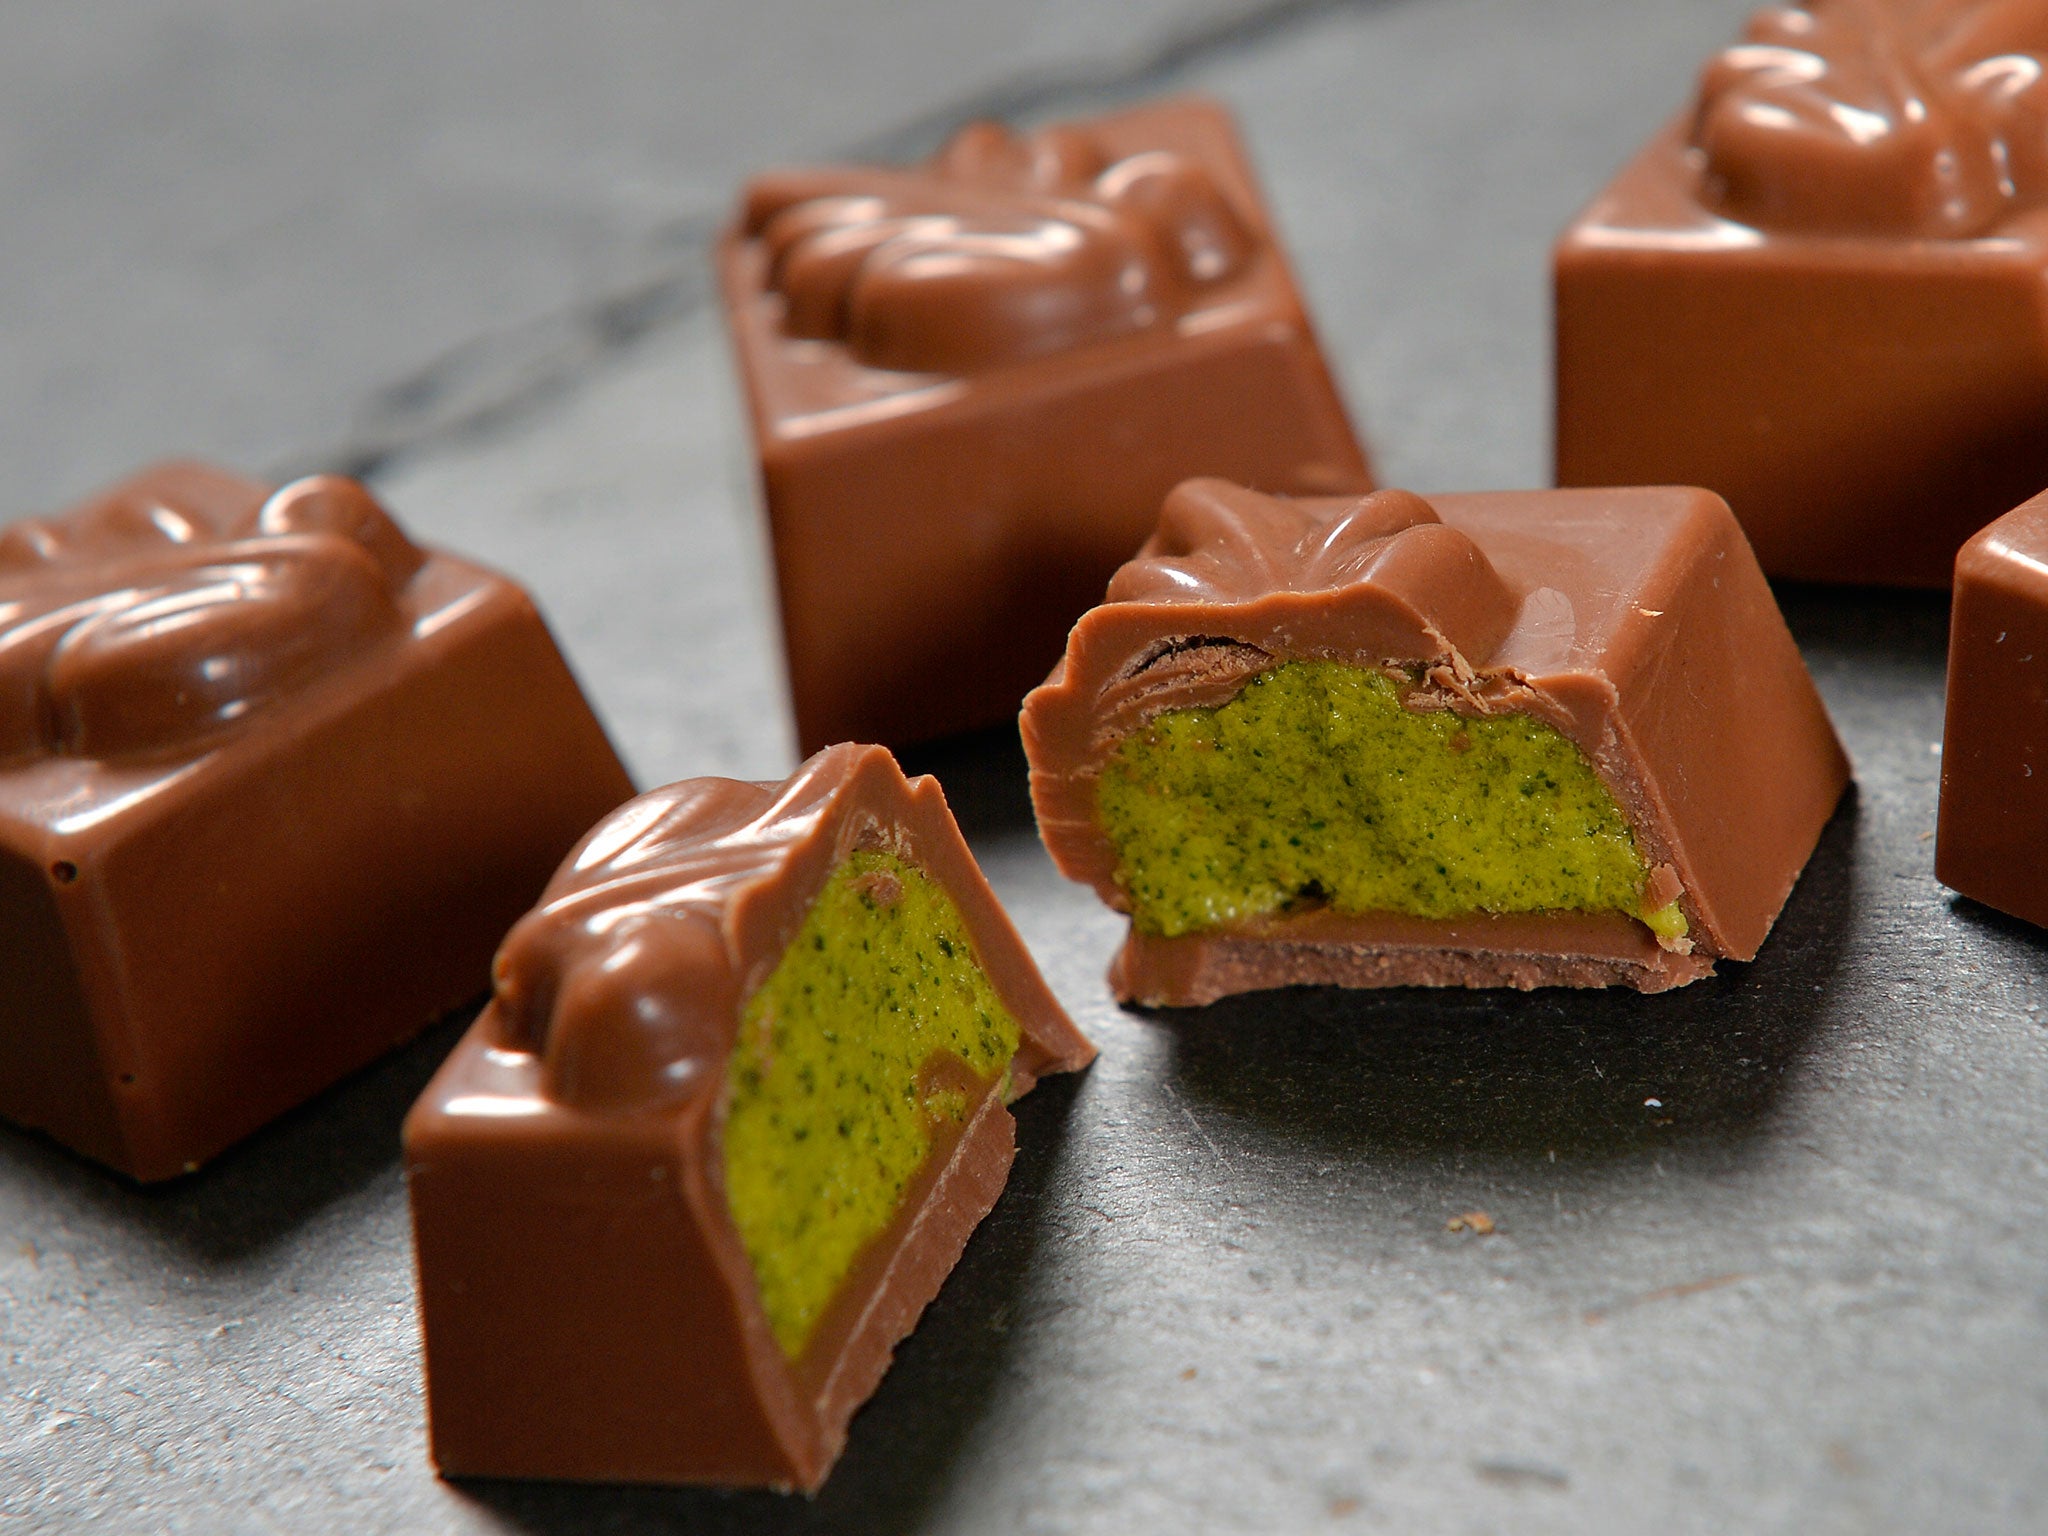 The Kale Crème chocolate developed as an experiment for Milk Tray's centenary.